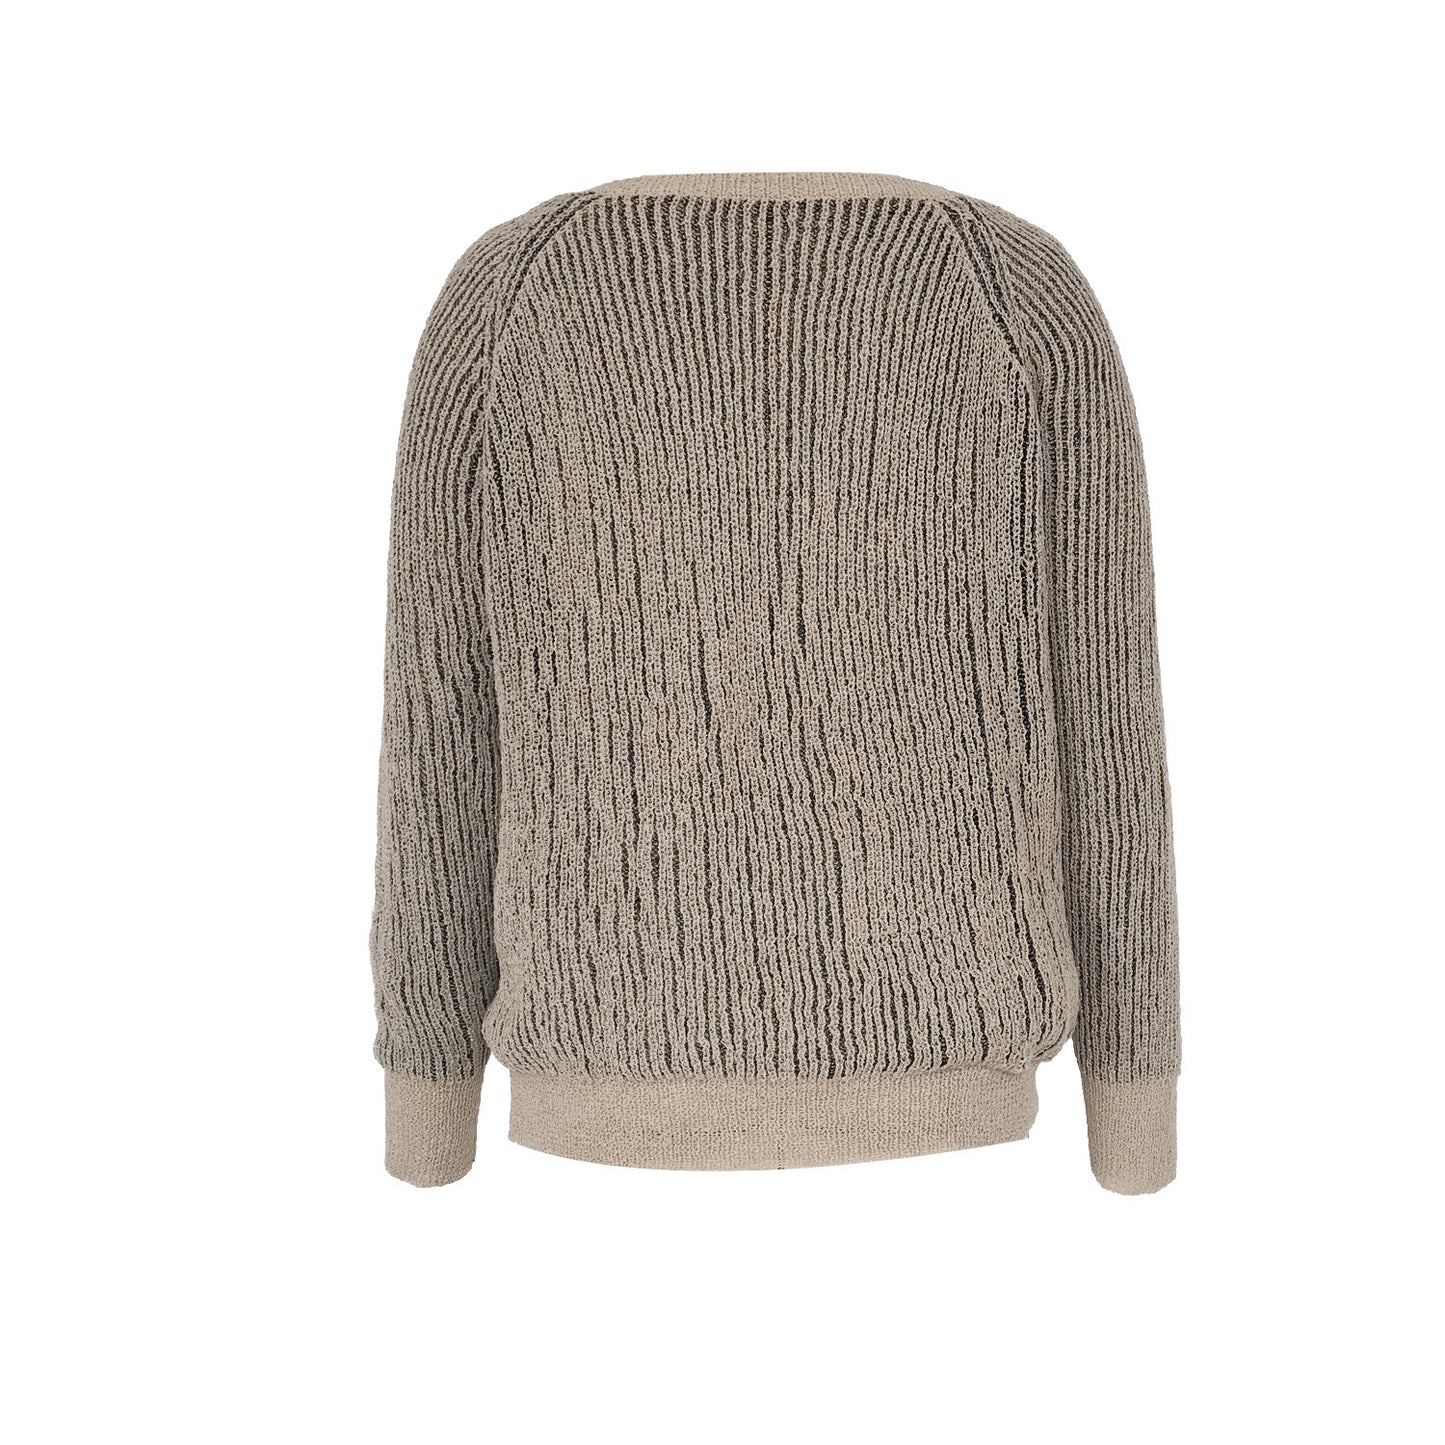 Knit sweater pullover sweater women autumn and winter